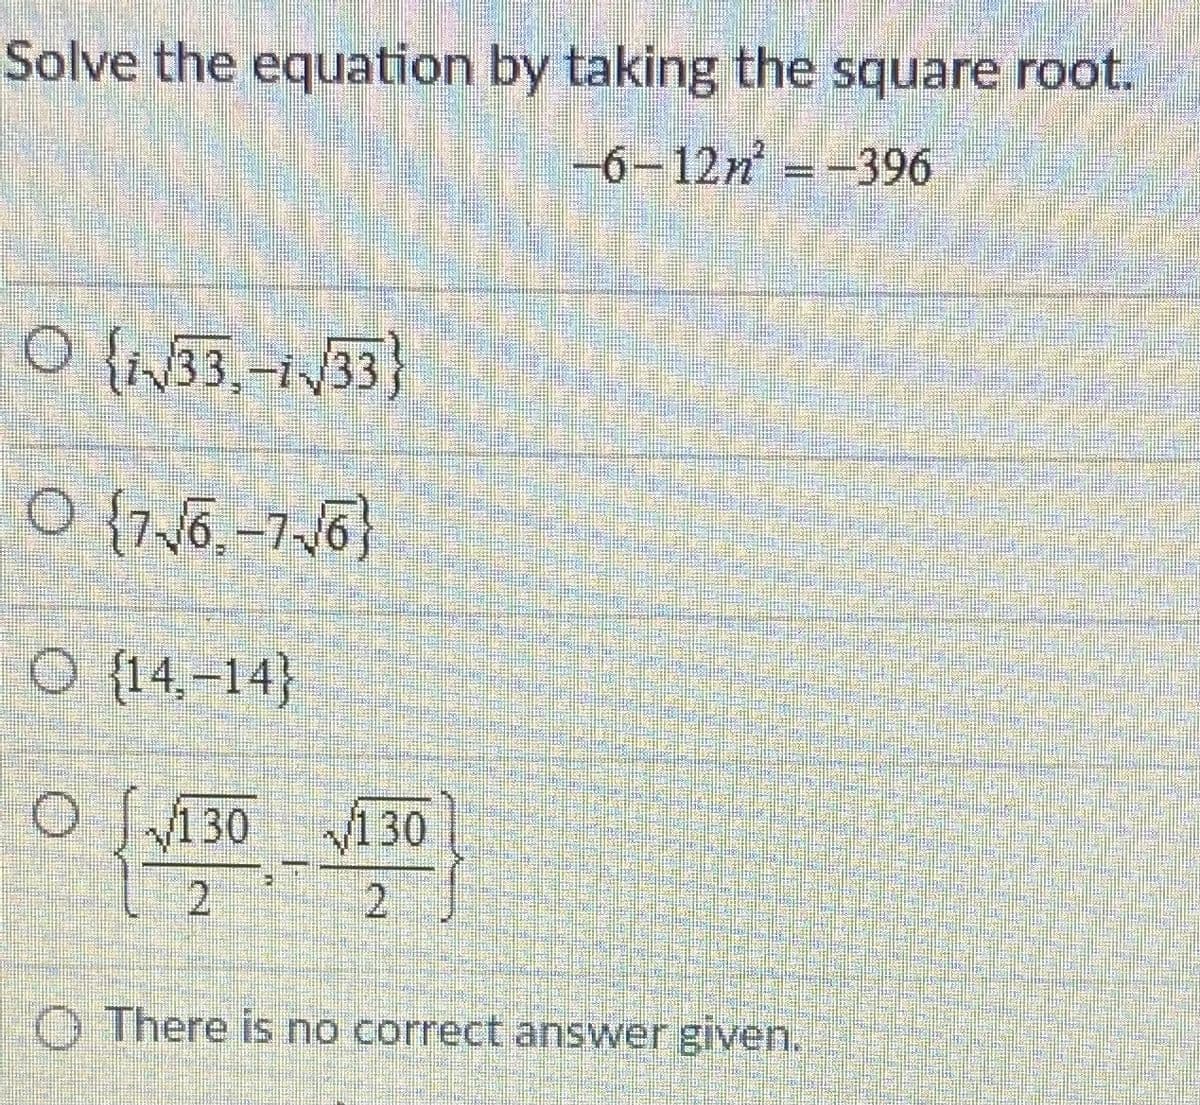 Solve the equation by taking the square root.
-6-12n--396
O {i33,-1/33}
O {76. –7-/6}
O {14.-14}
O S130 130
2)
O There is no correct answer given.
